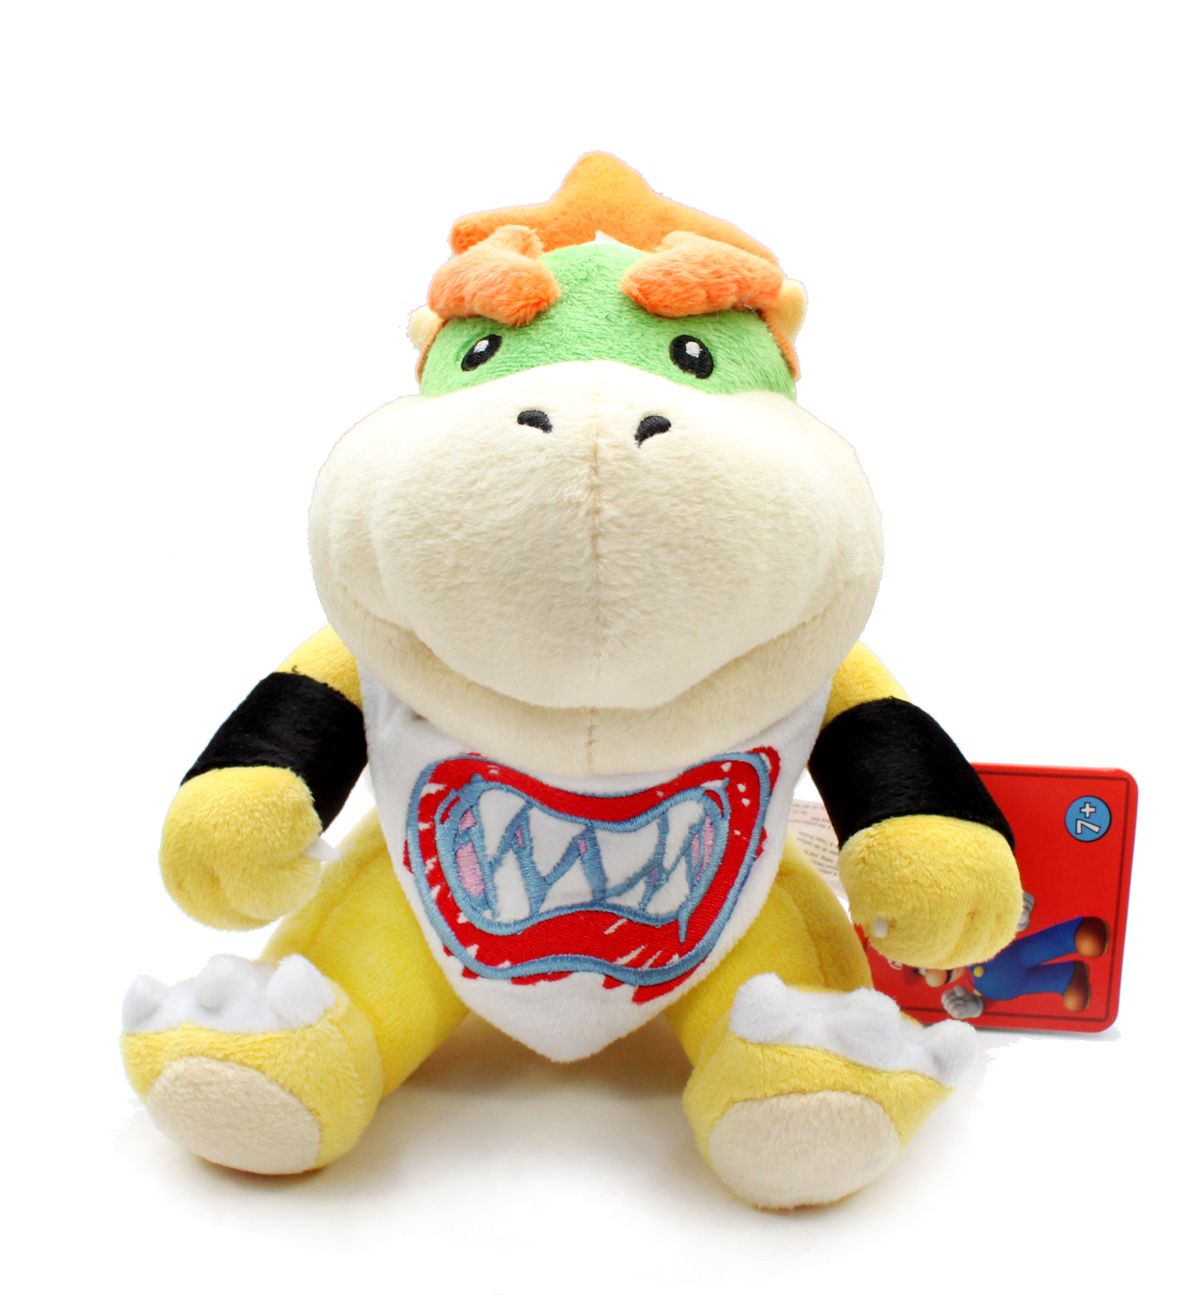 Authentic Brand New Global Holdings Super Mario Plush  6 Bowser Jr